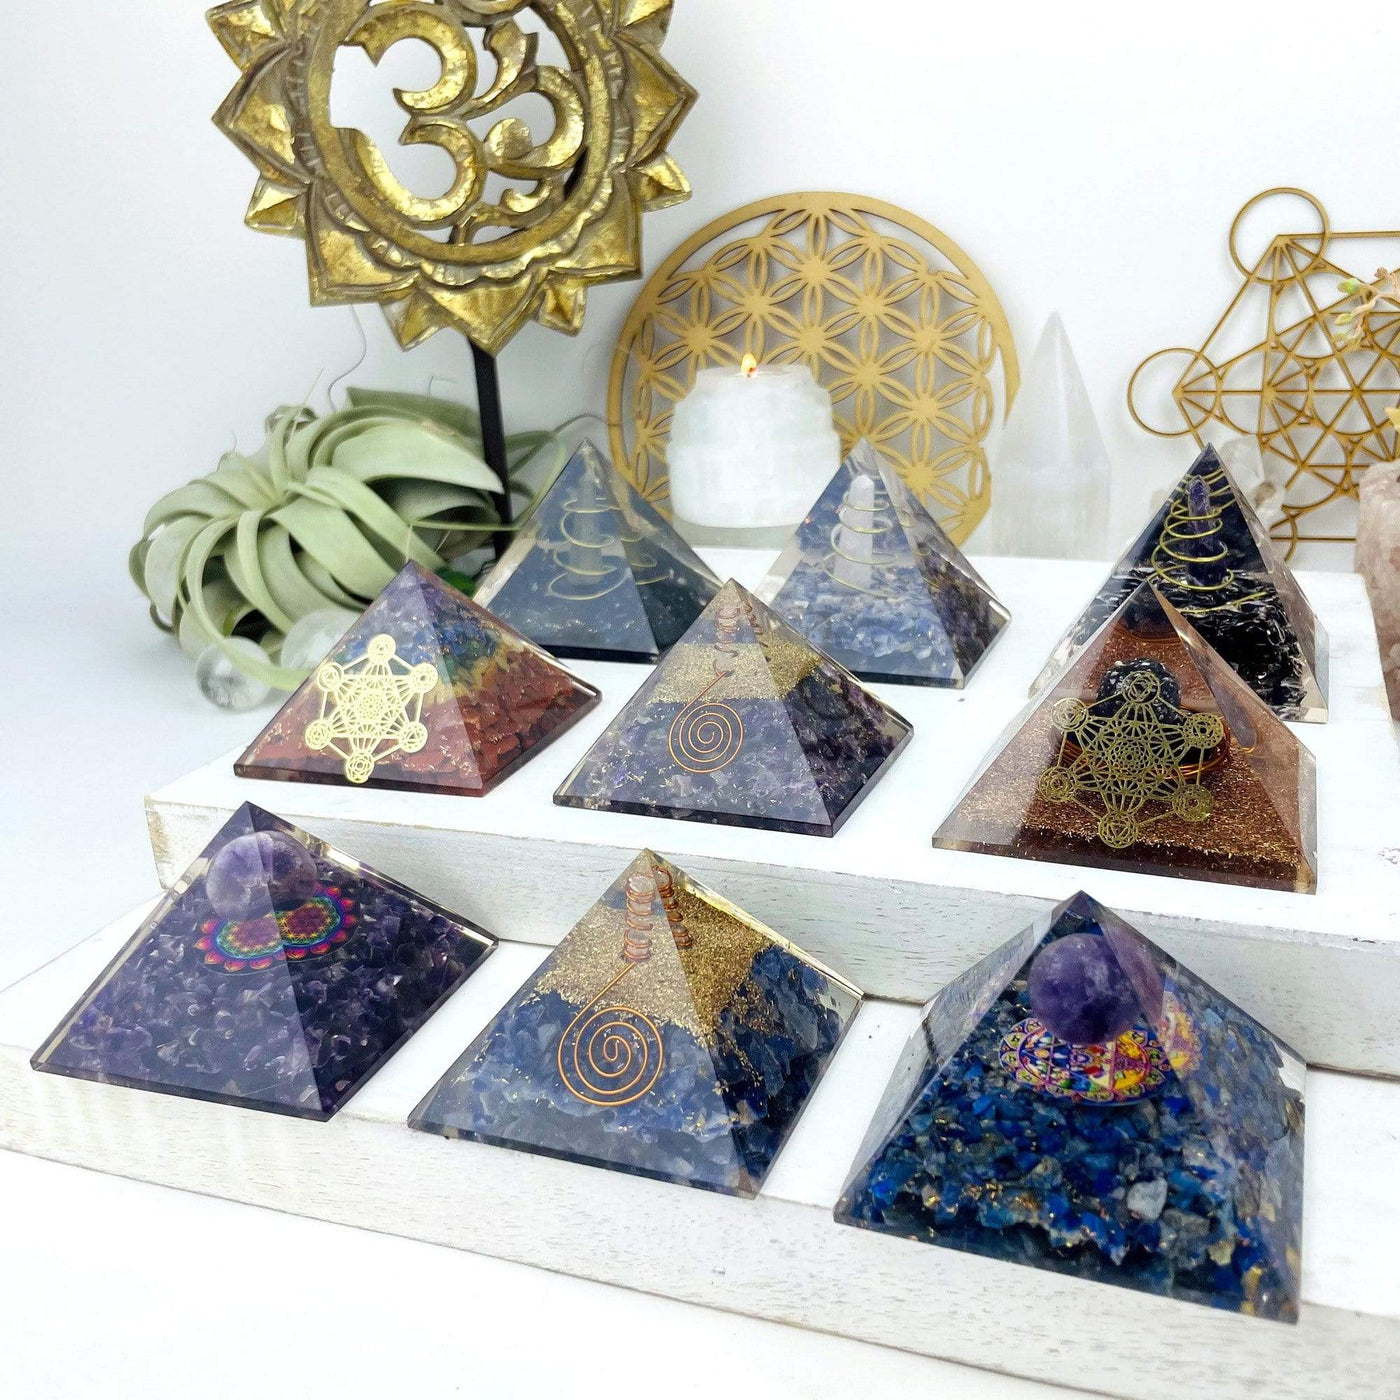 multiple styles of orgone pyramids displayed on white background